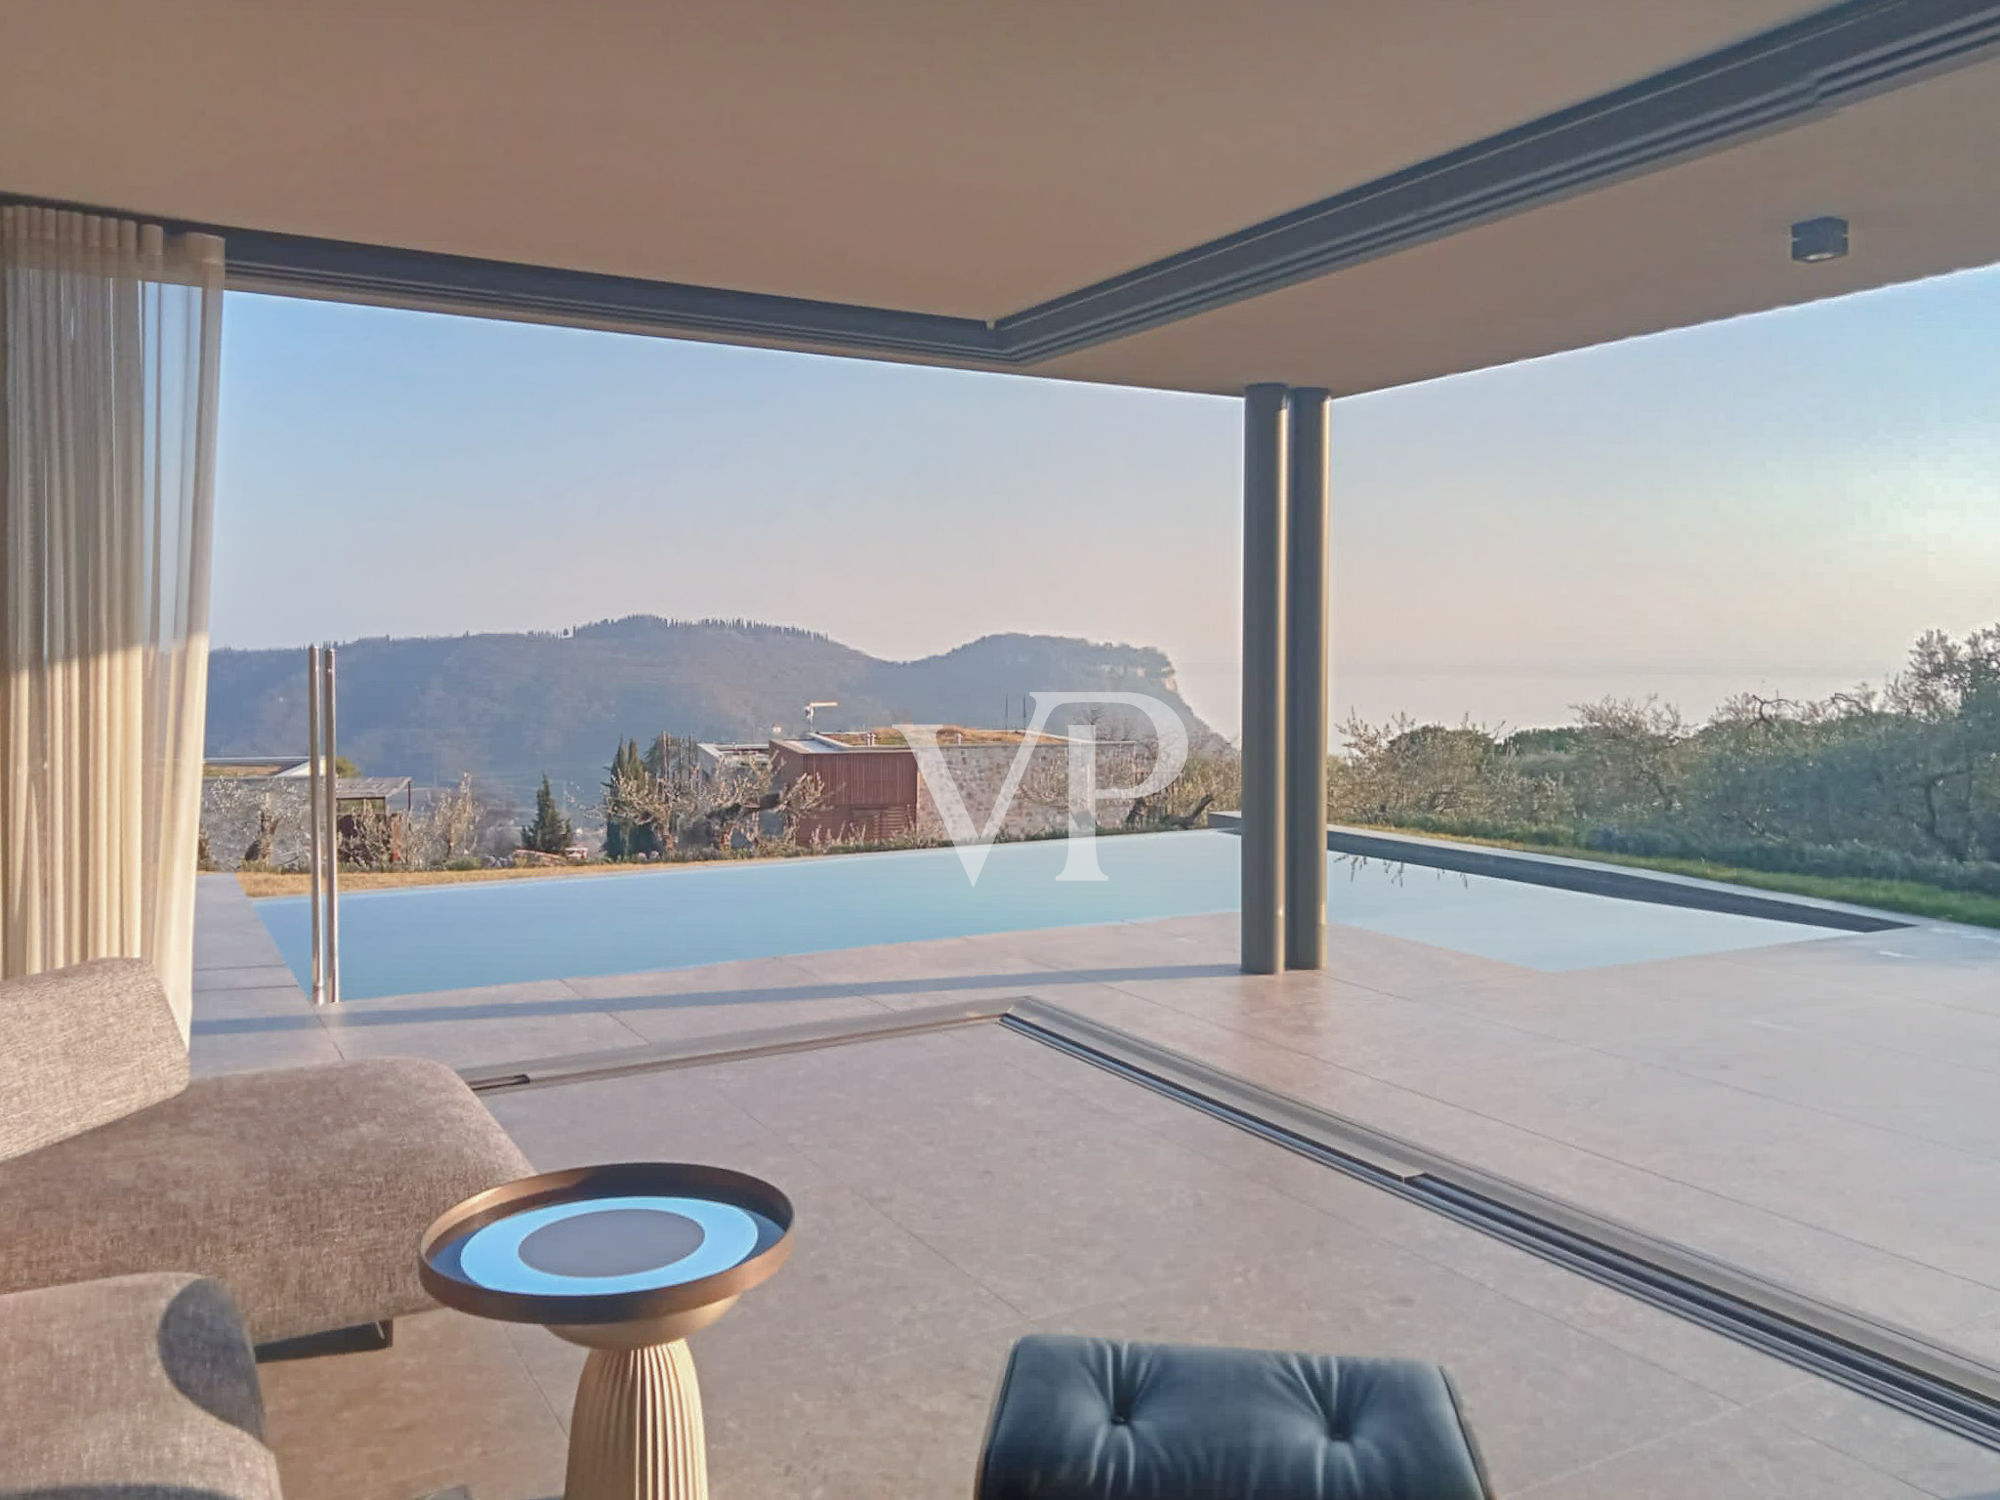 Modern villa with pool and beautiful view of the bay of Garda.